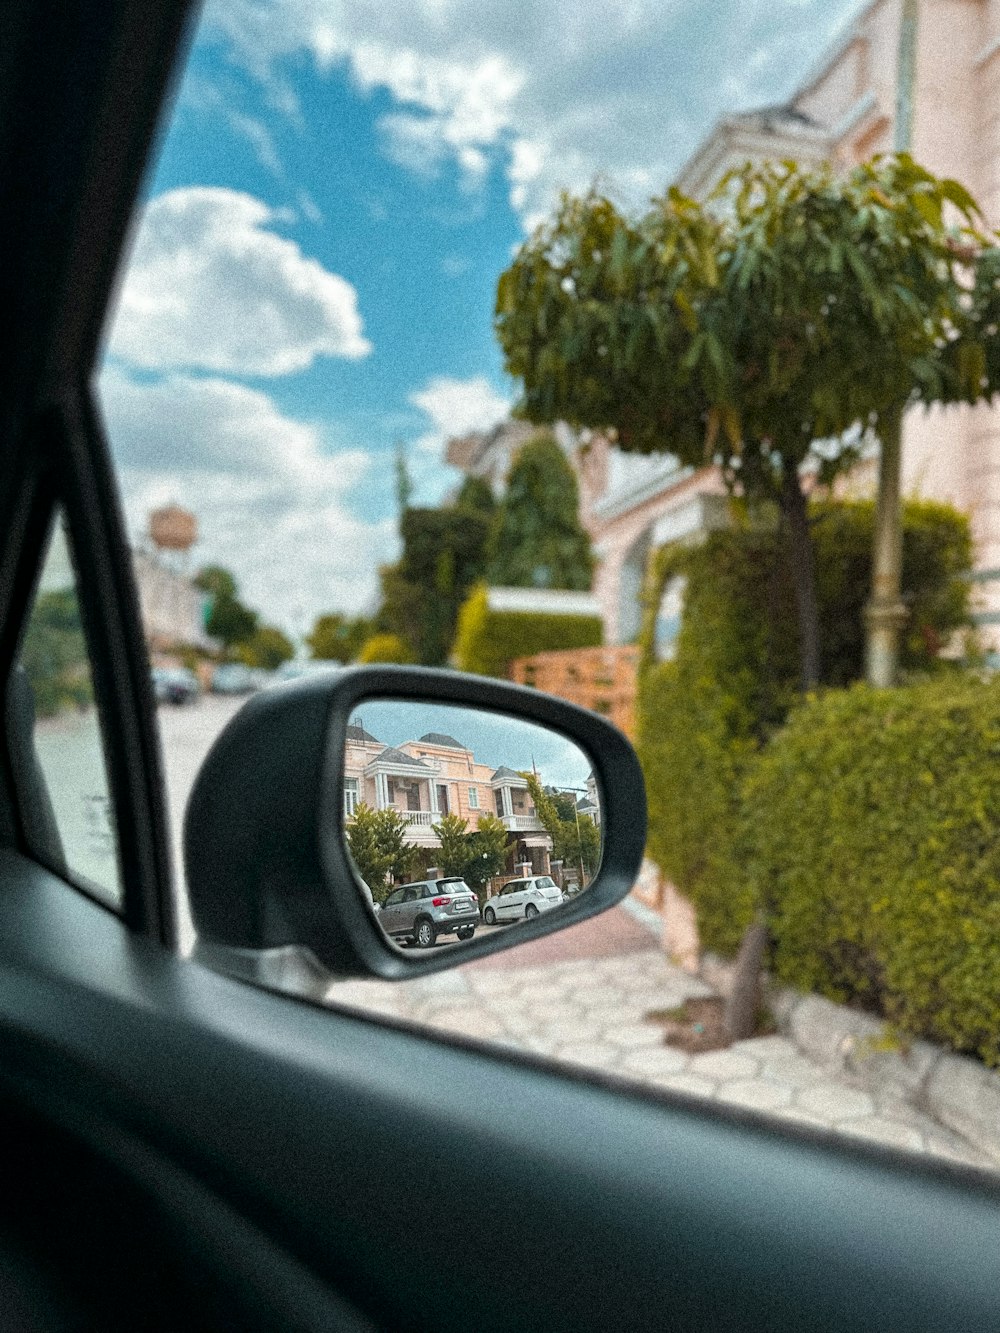 a car's side view mirror with a house in the background